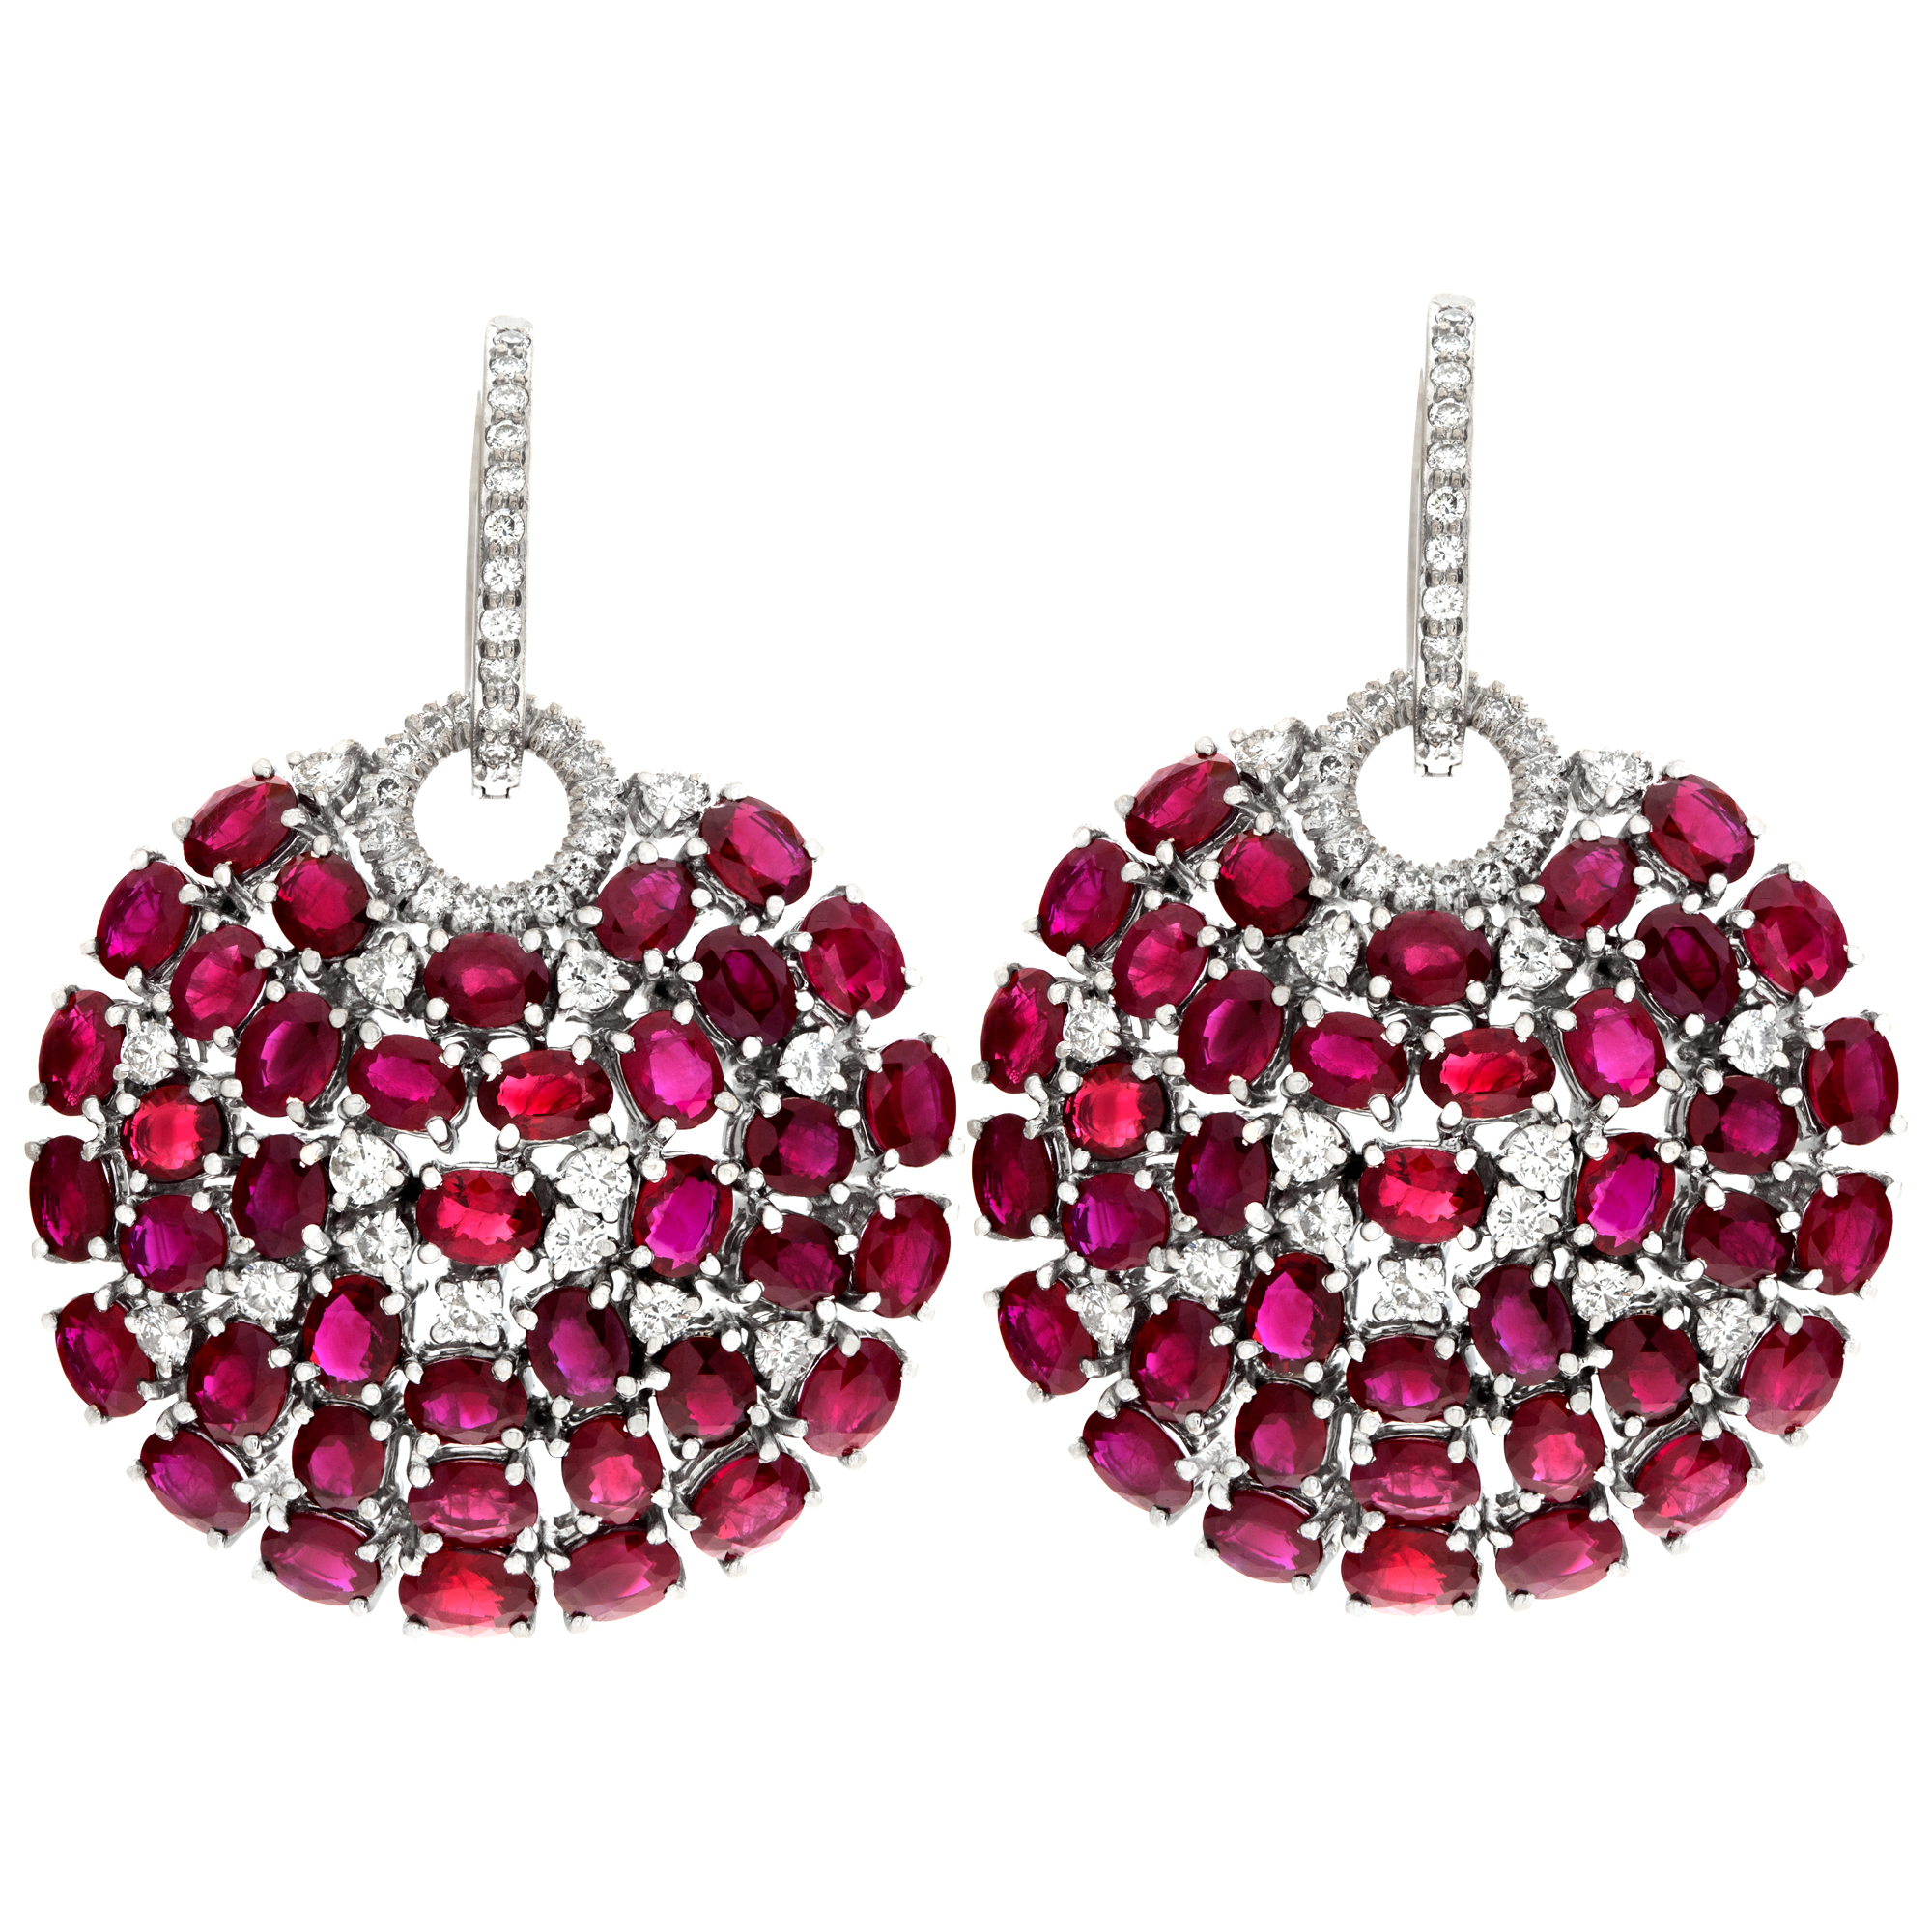 18k white gold drop earrings with 2.26 cts in diamonds and 26.13 cts in rubies